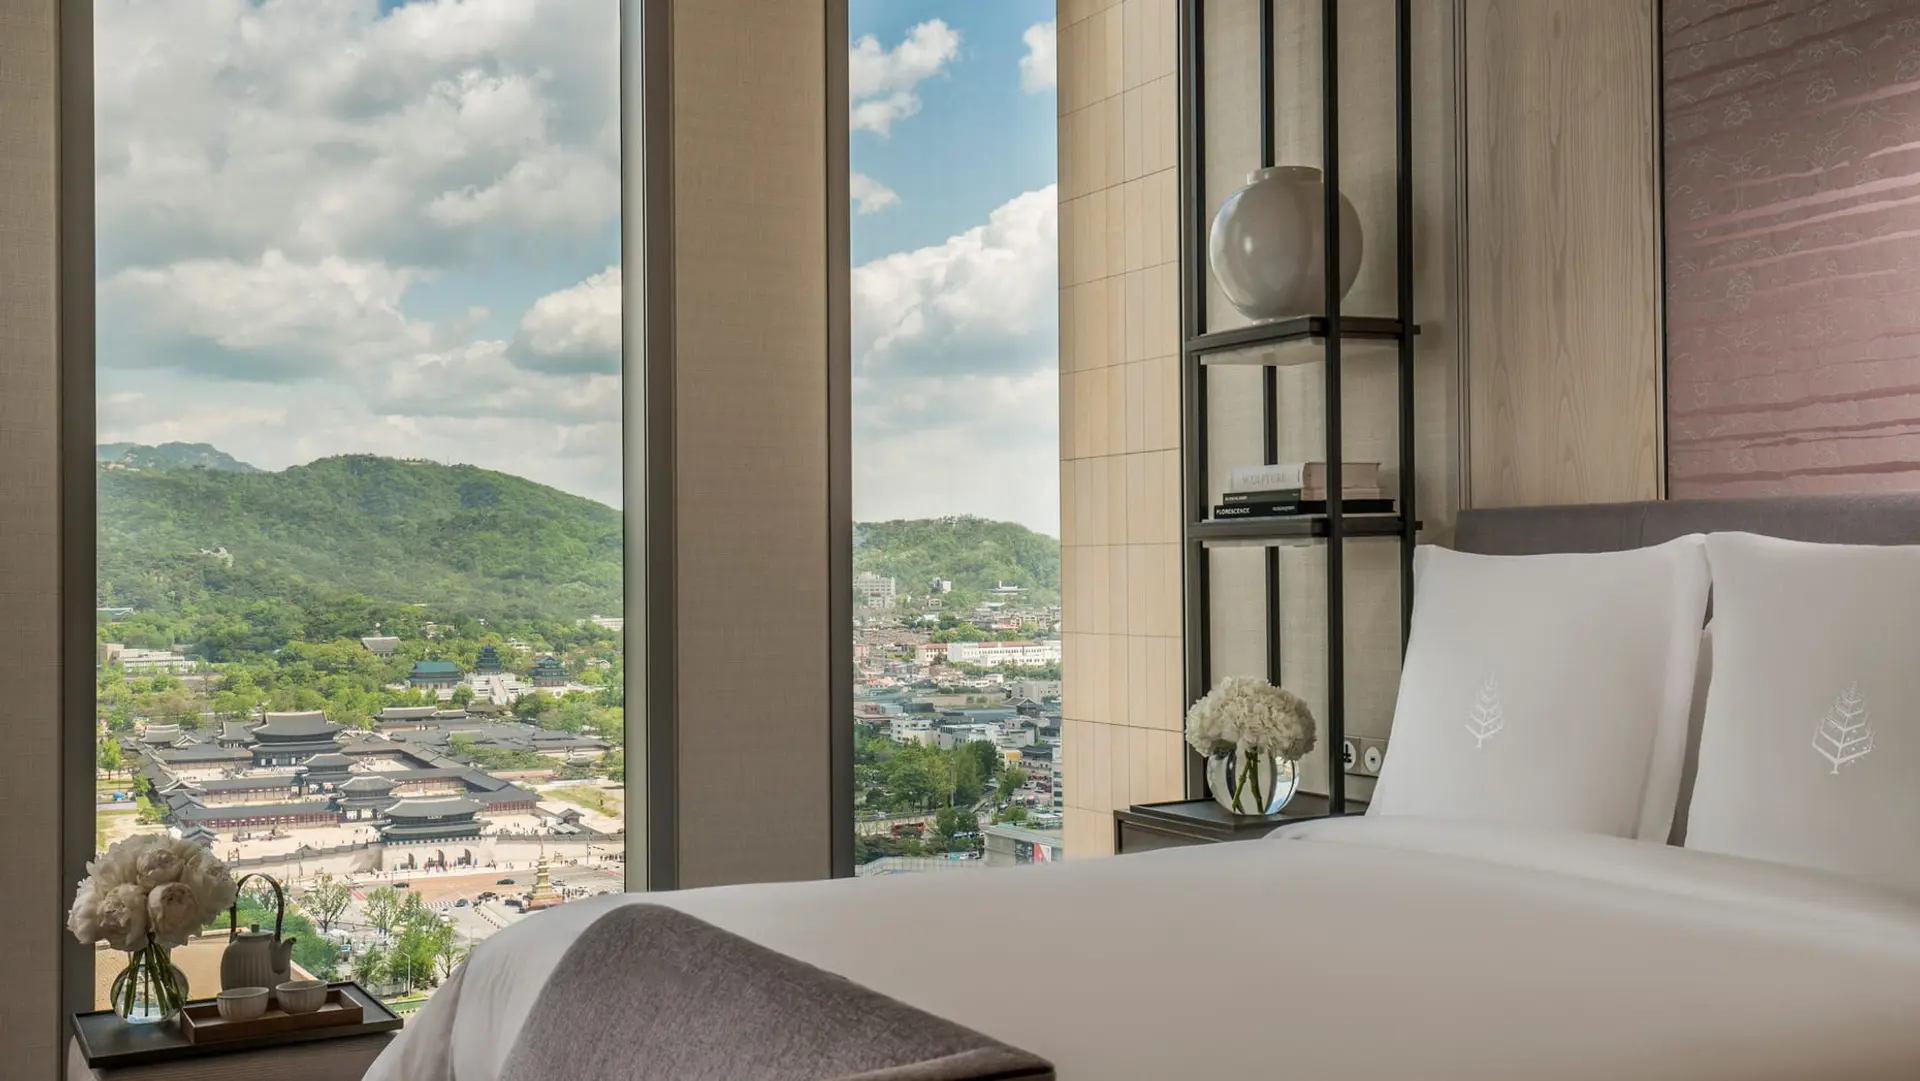 Room at four seasons hotel seoul with view